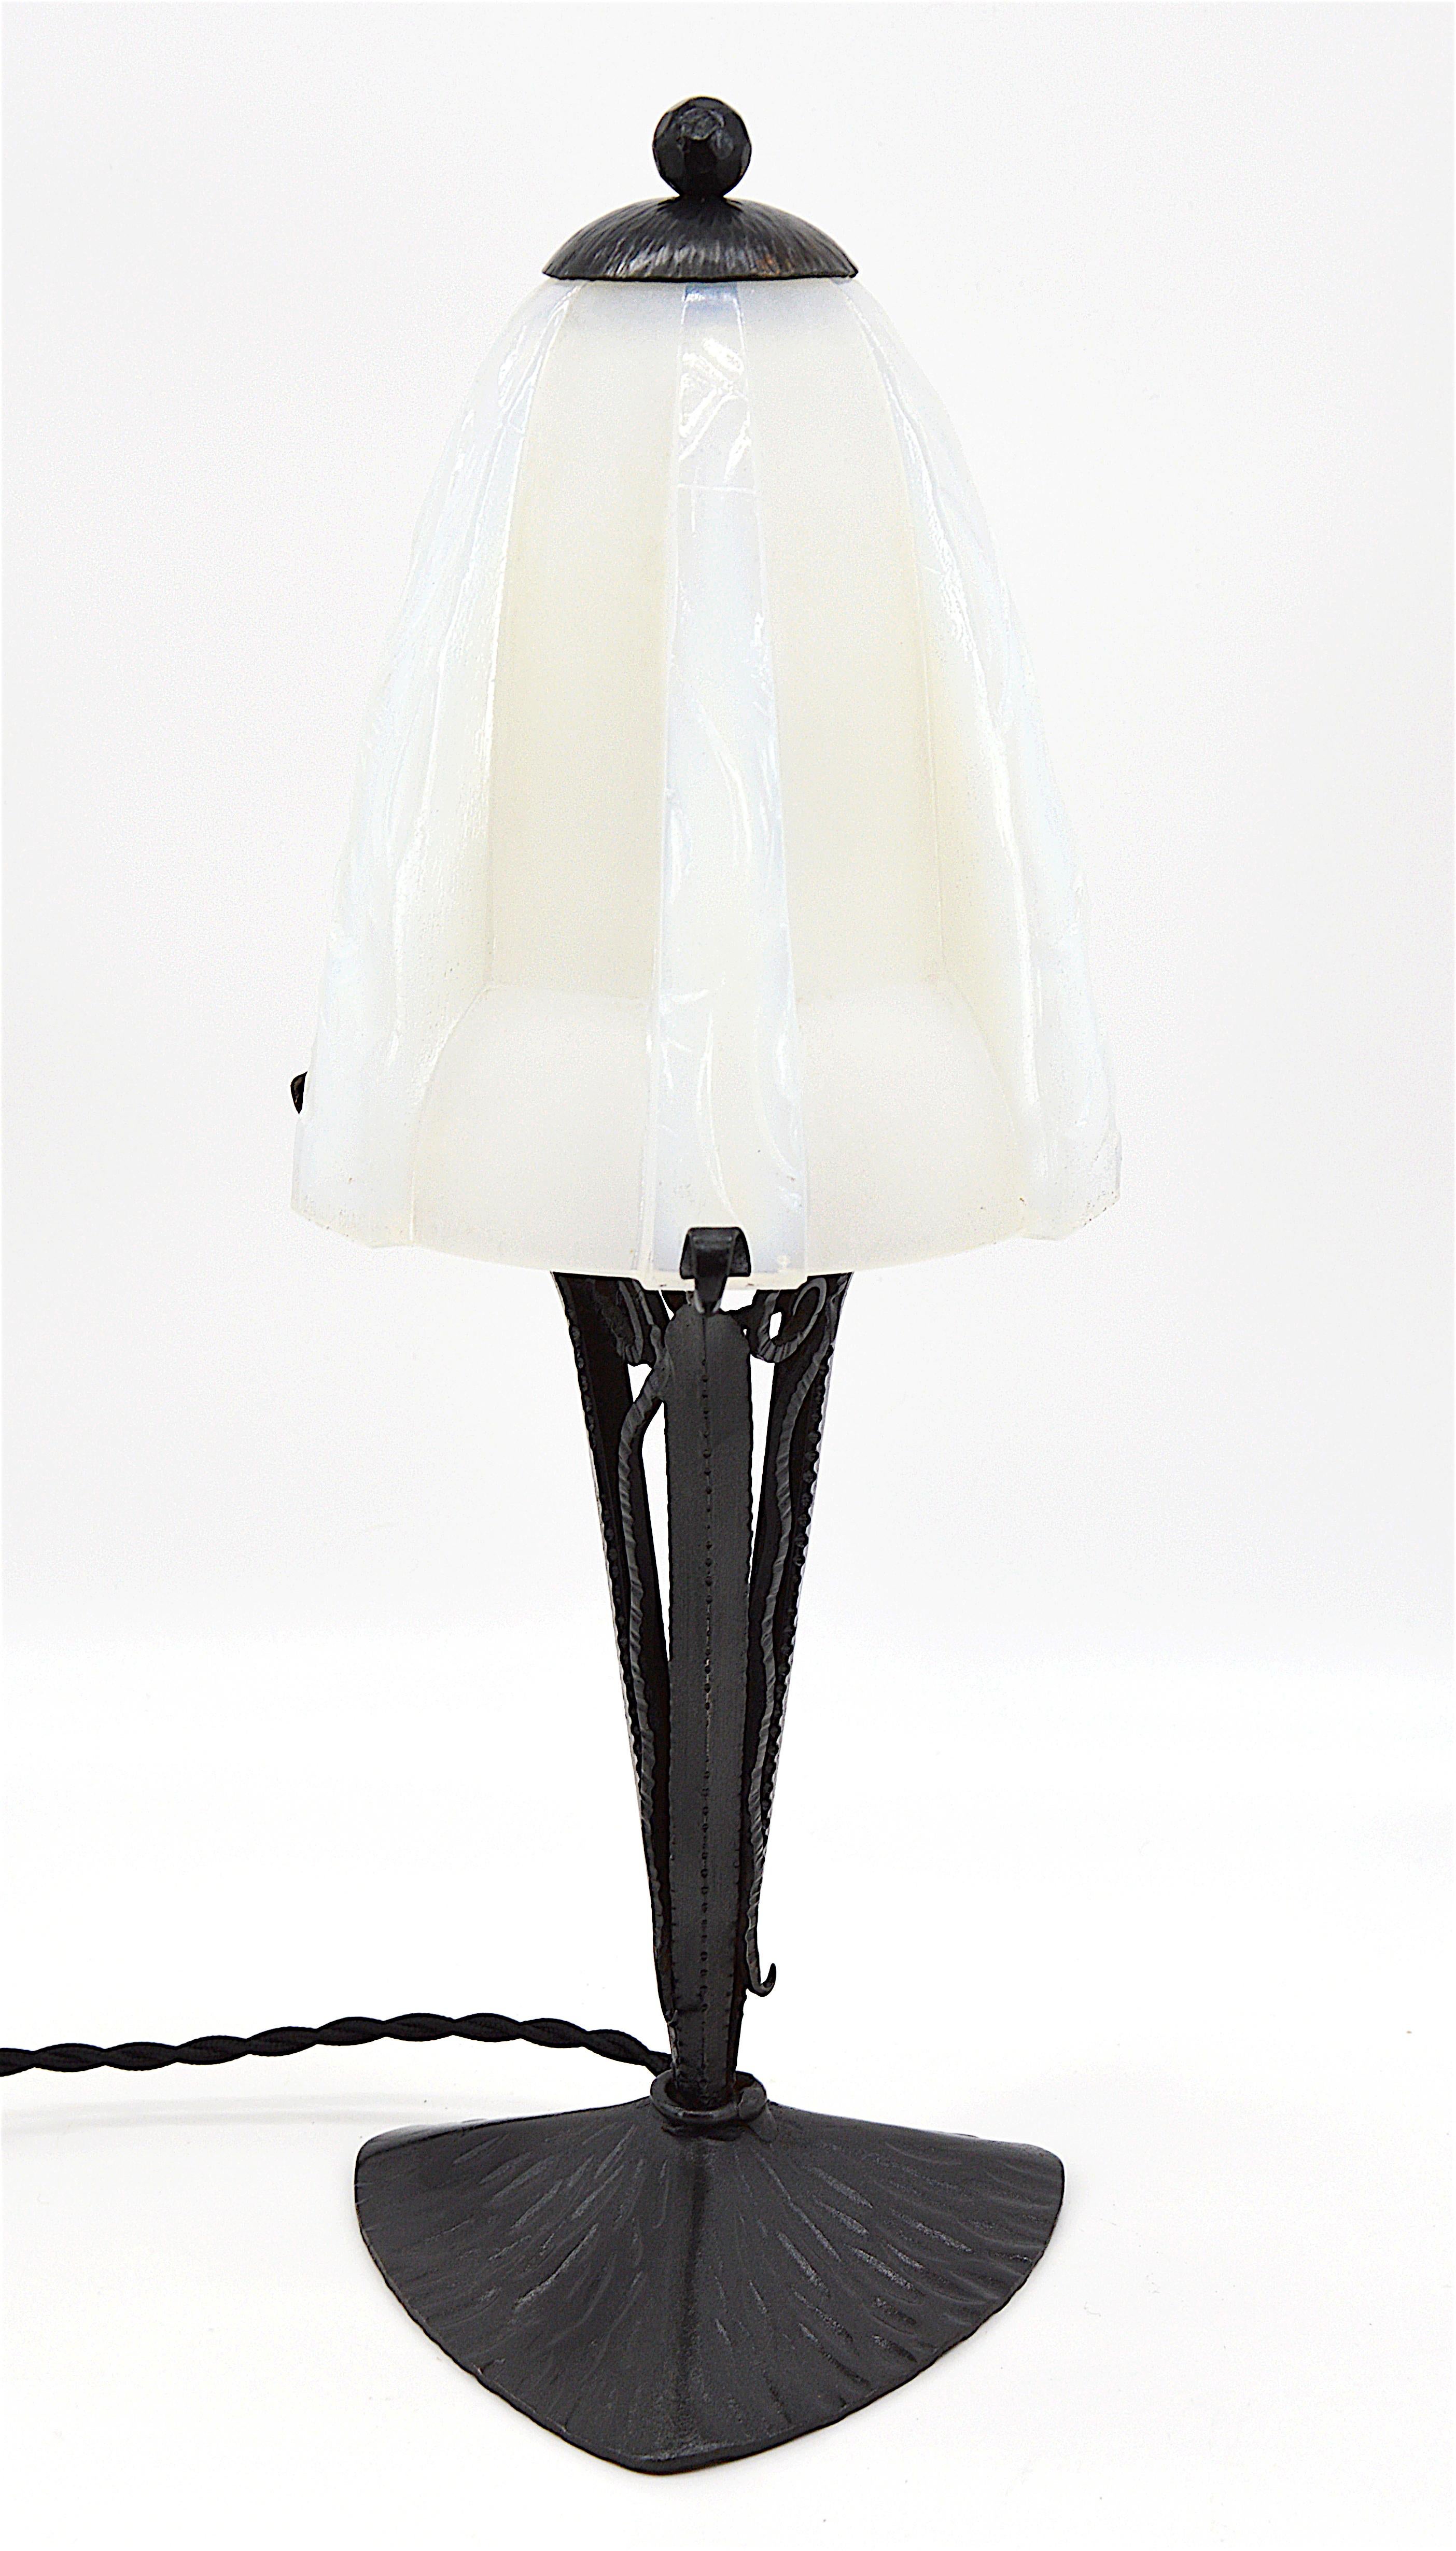 Jean Gauthier French Art Deco Opalescent Table Lamp, 1930s In Excellent Condition For Sale In Saint-Amans-des-Cots, FR